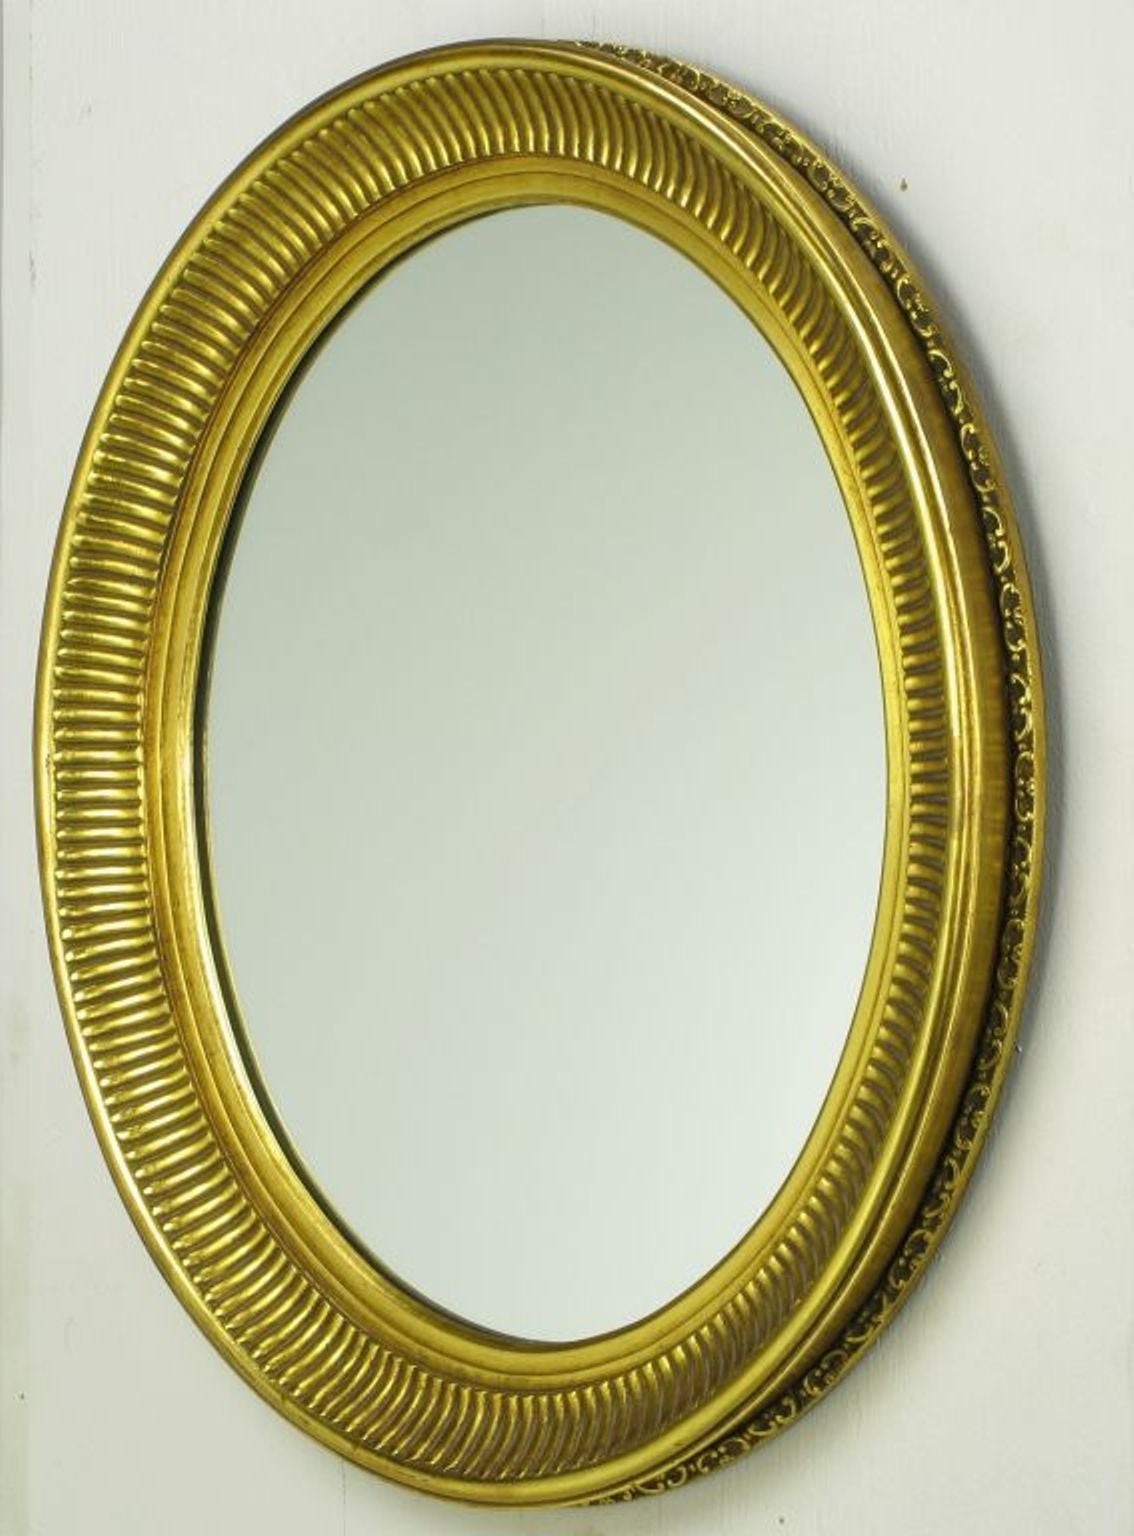 Carved Wood & Gilt Oval French Regency Style Mirror